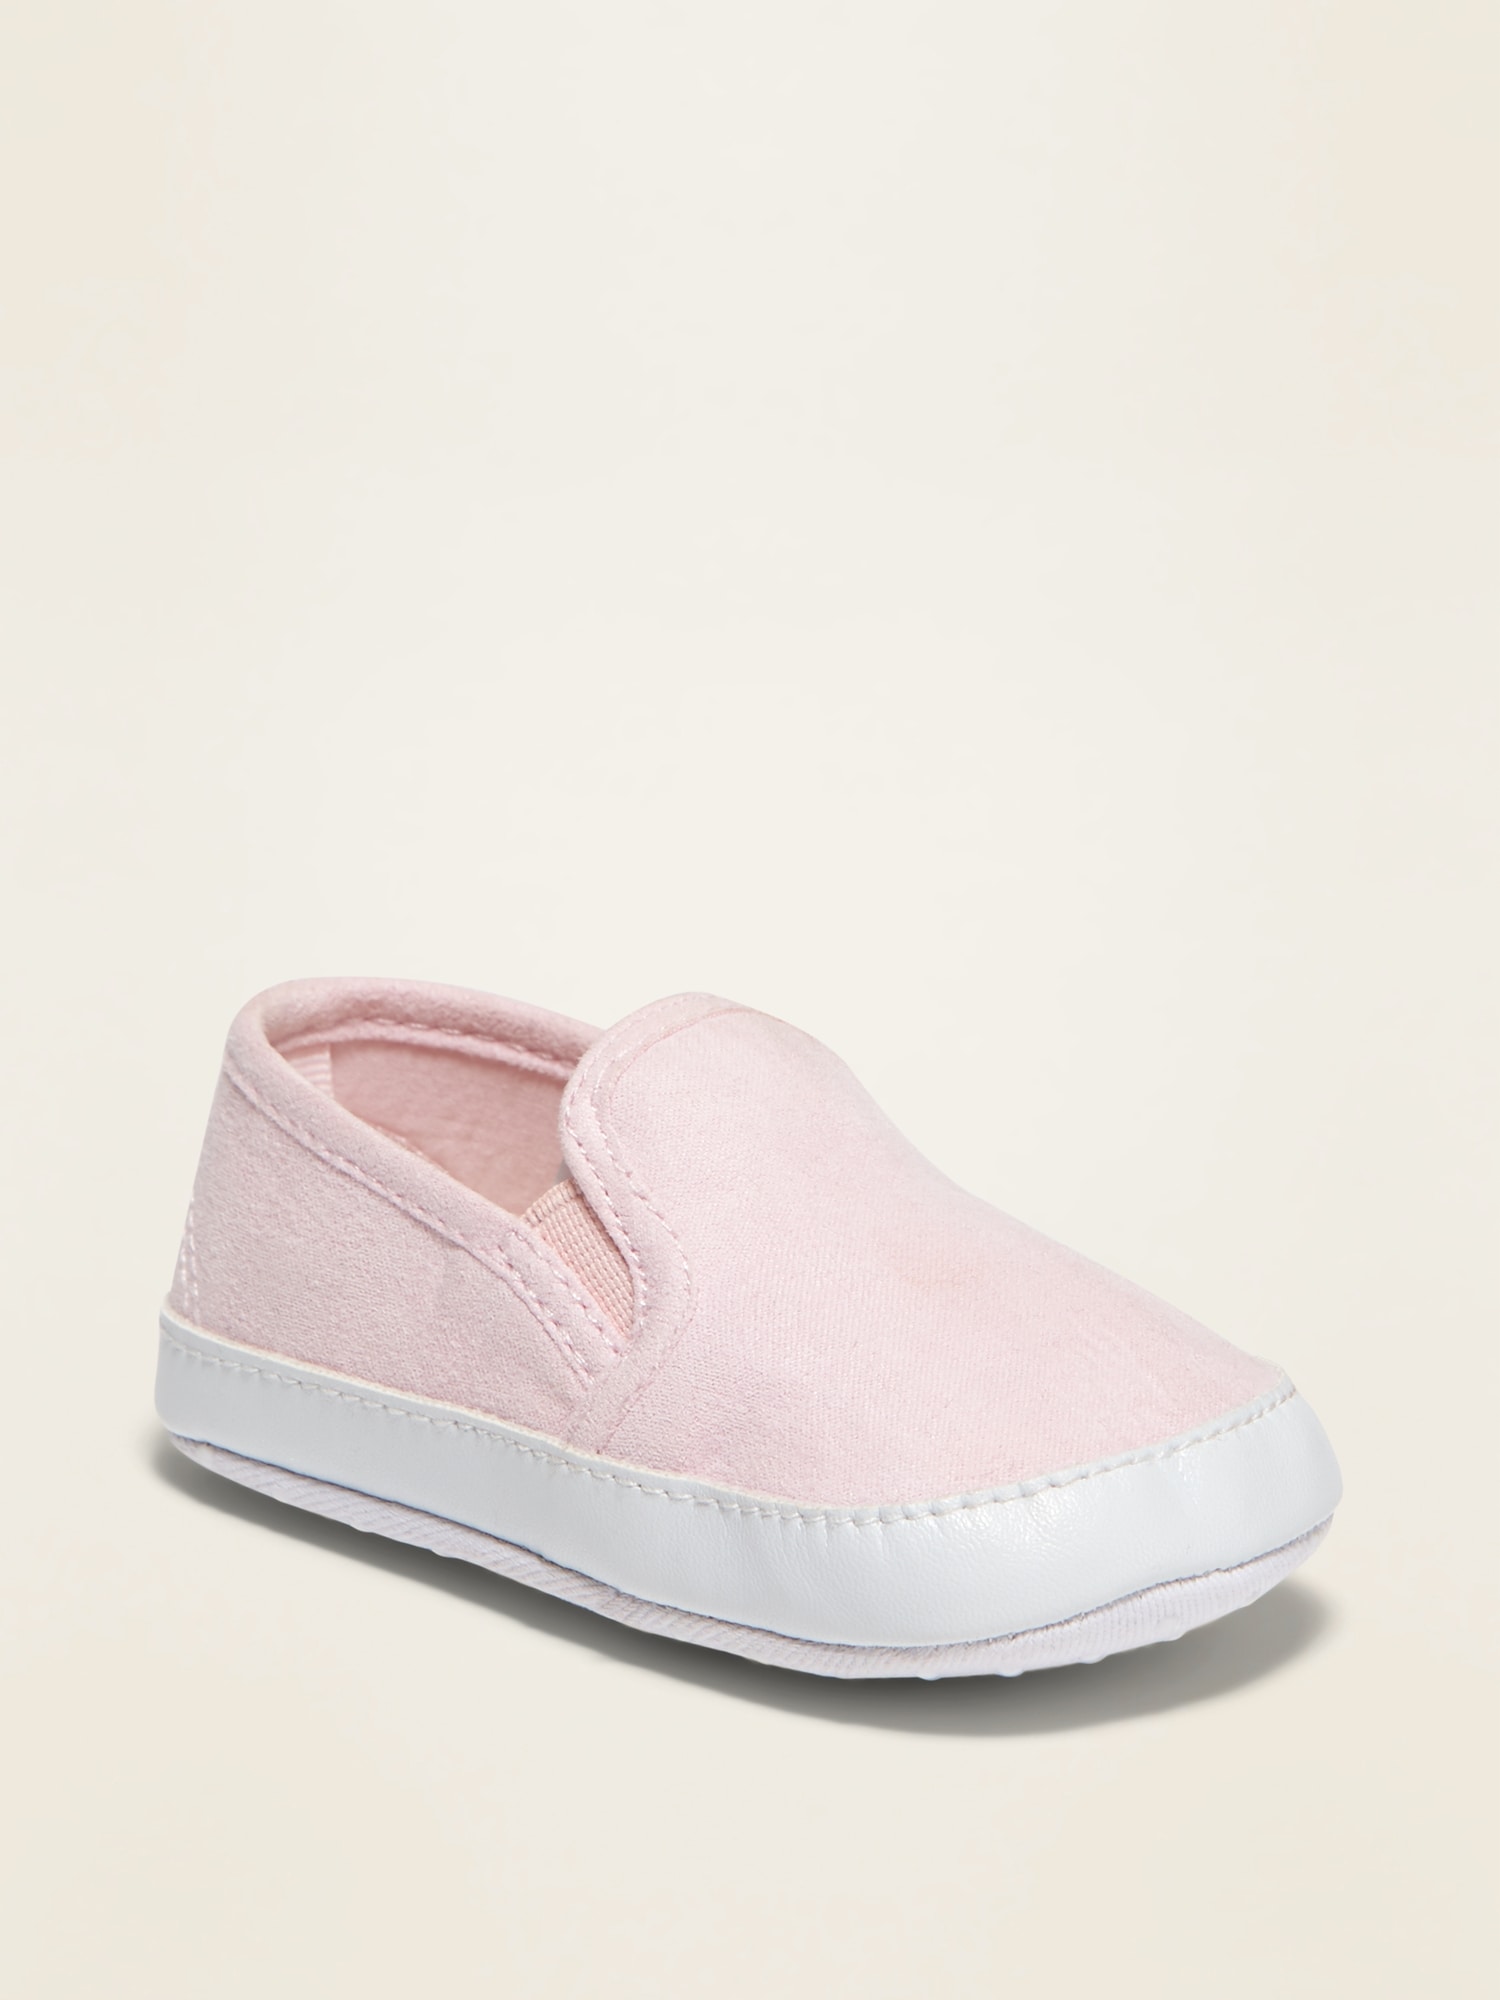 Unisex Faux-Suede Slip-Ons For Baby 